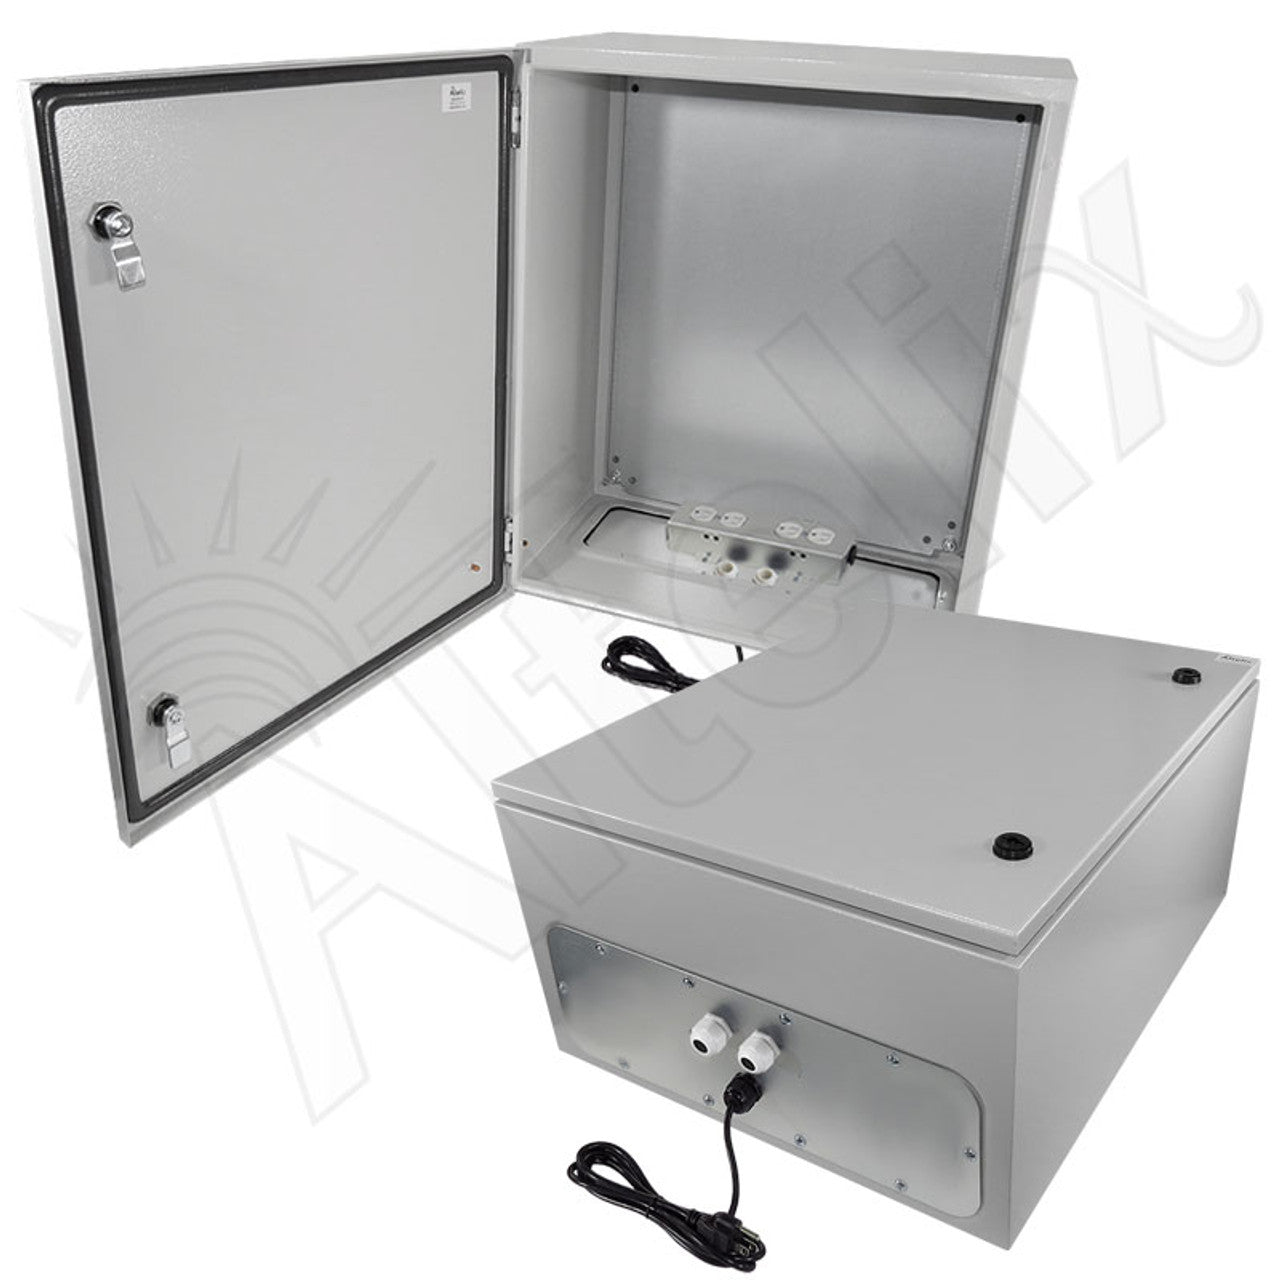 Altelix NEMA 4X Steel Weatherproof Enclosure with 120 VAC Outlets and Power Cord